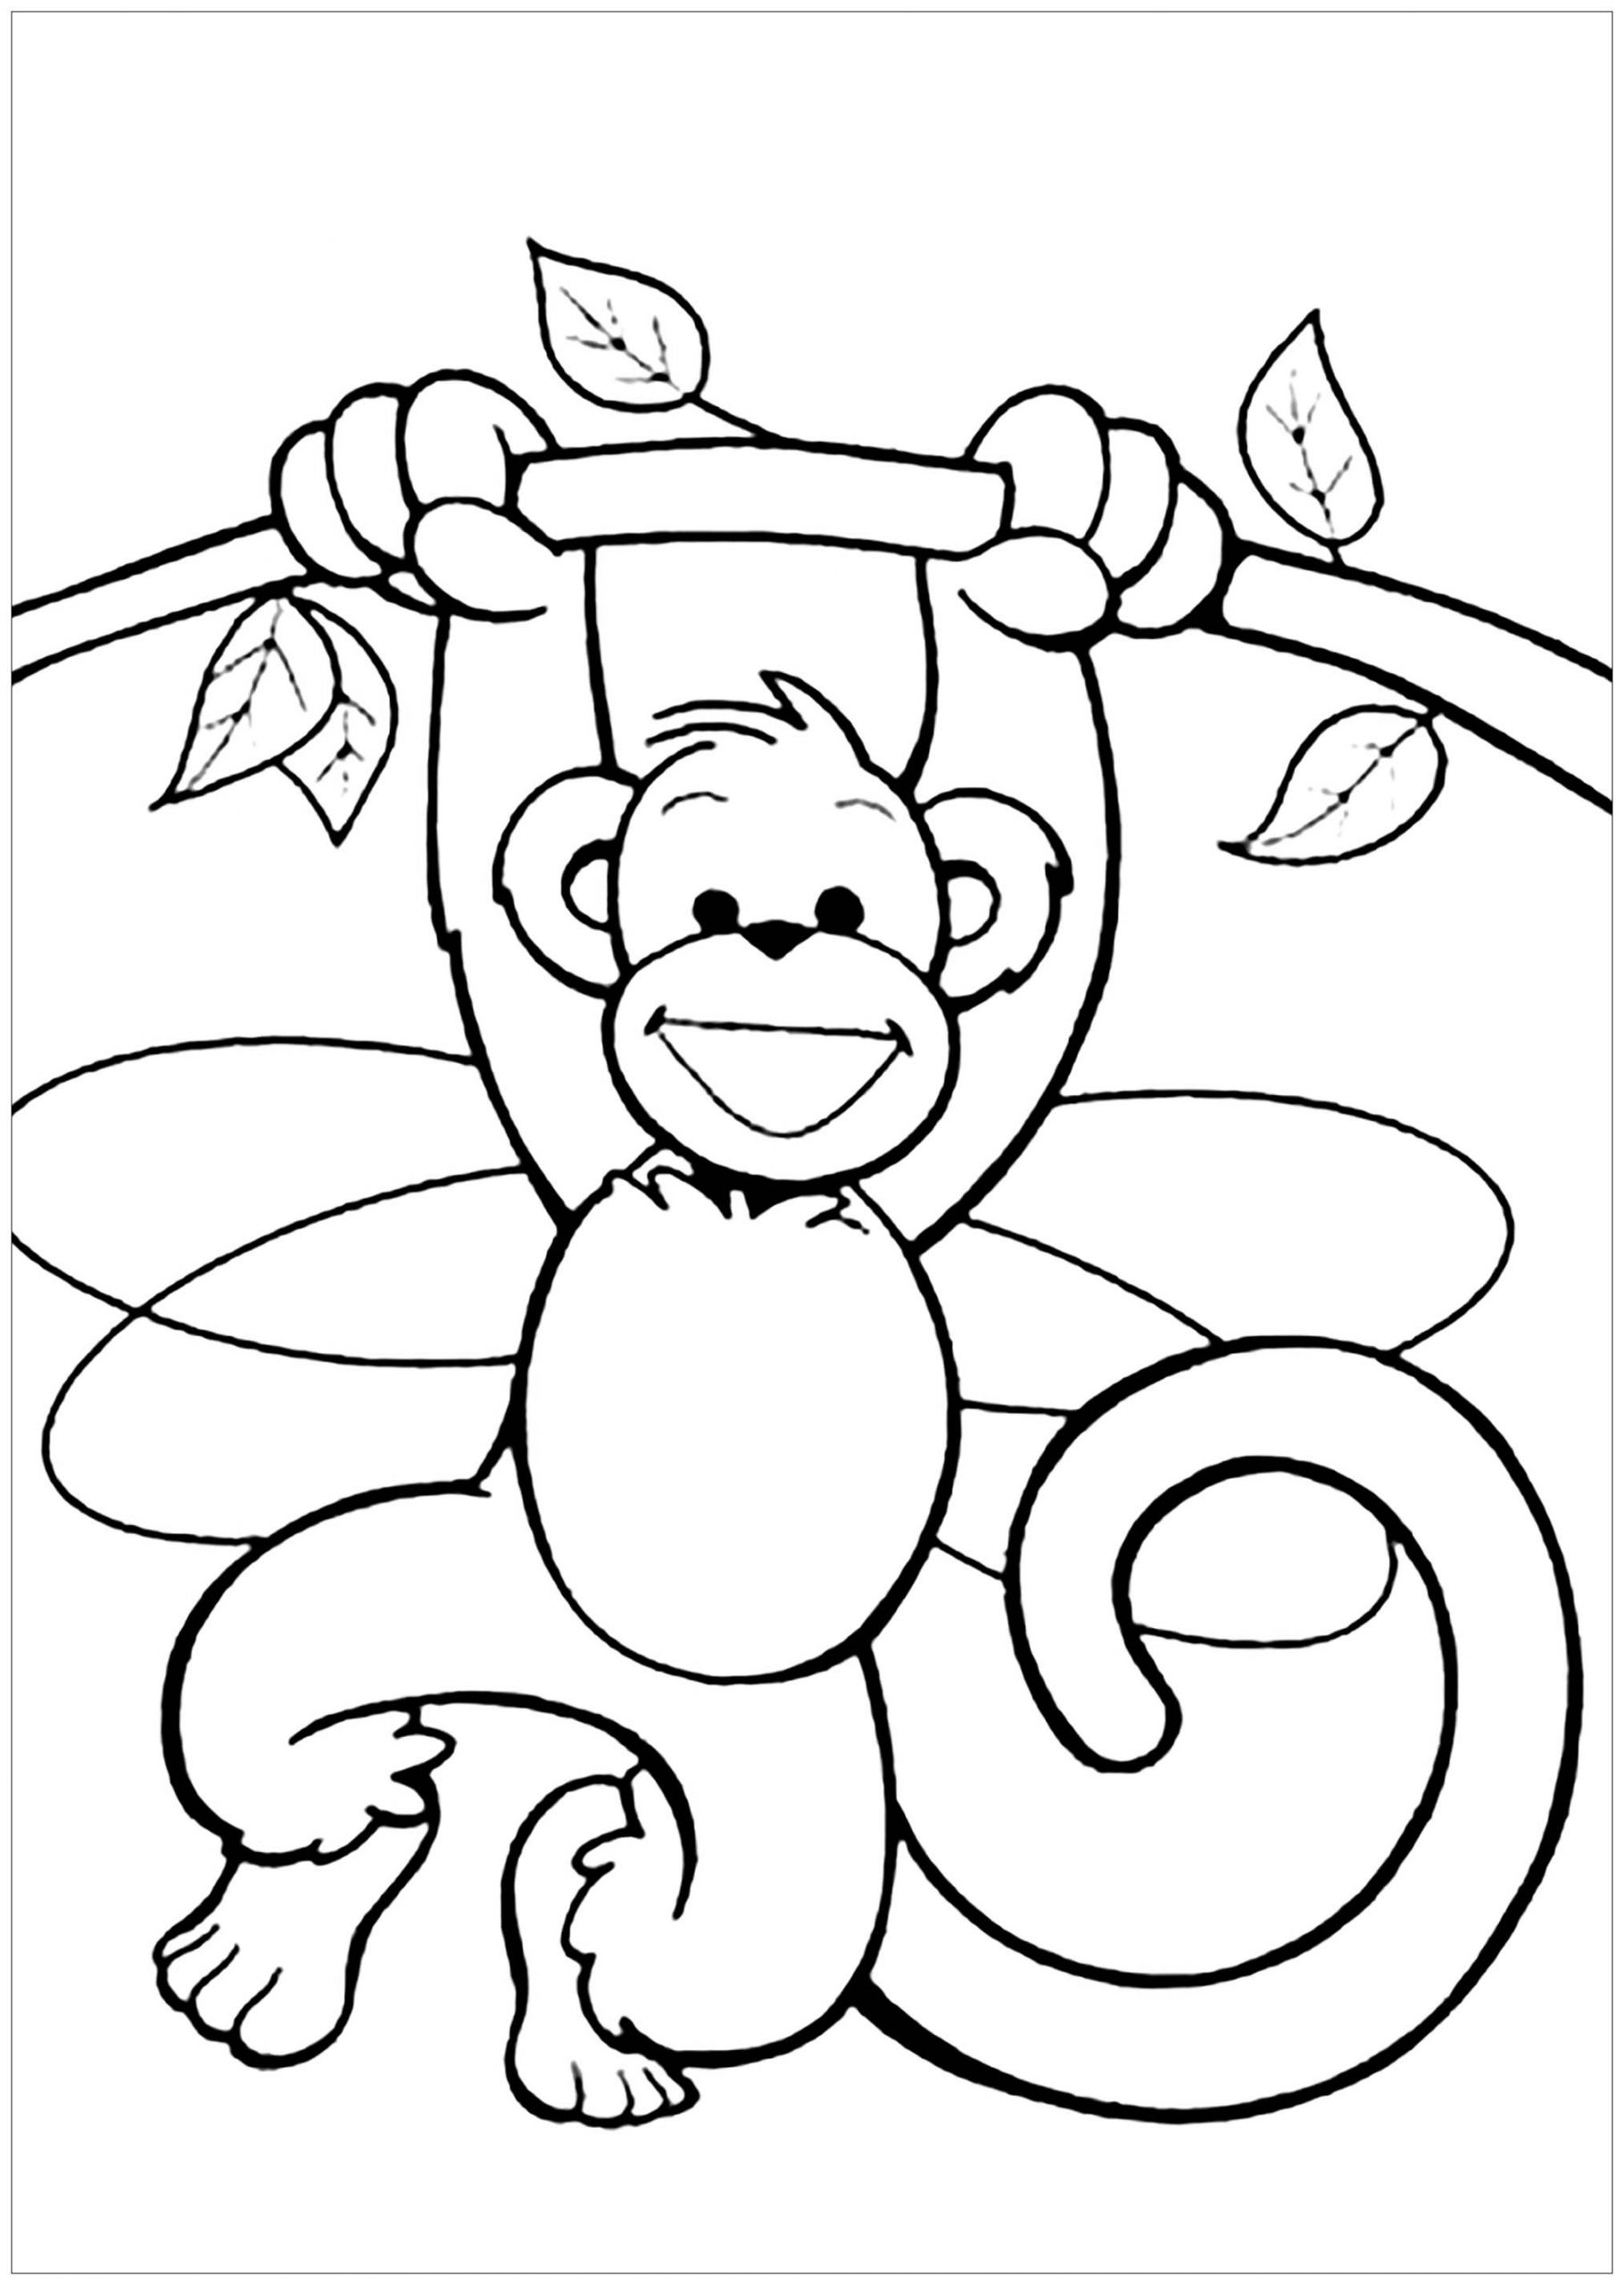 Online Coloring Book For Kids
 Monkeys to for free Monkeys Kids Coloring Pages